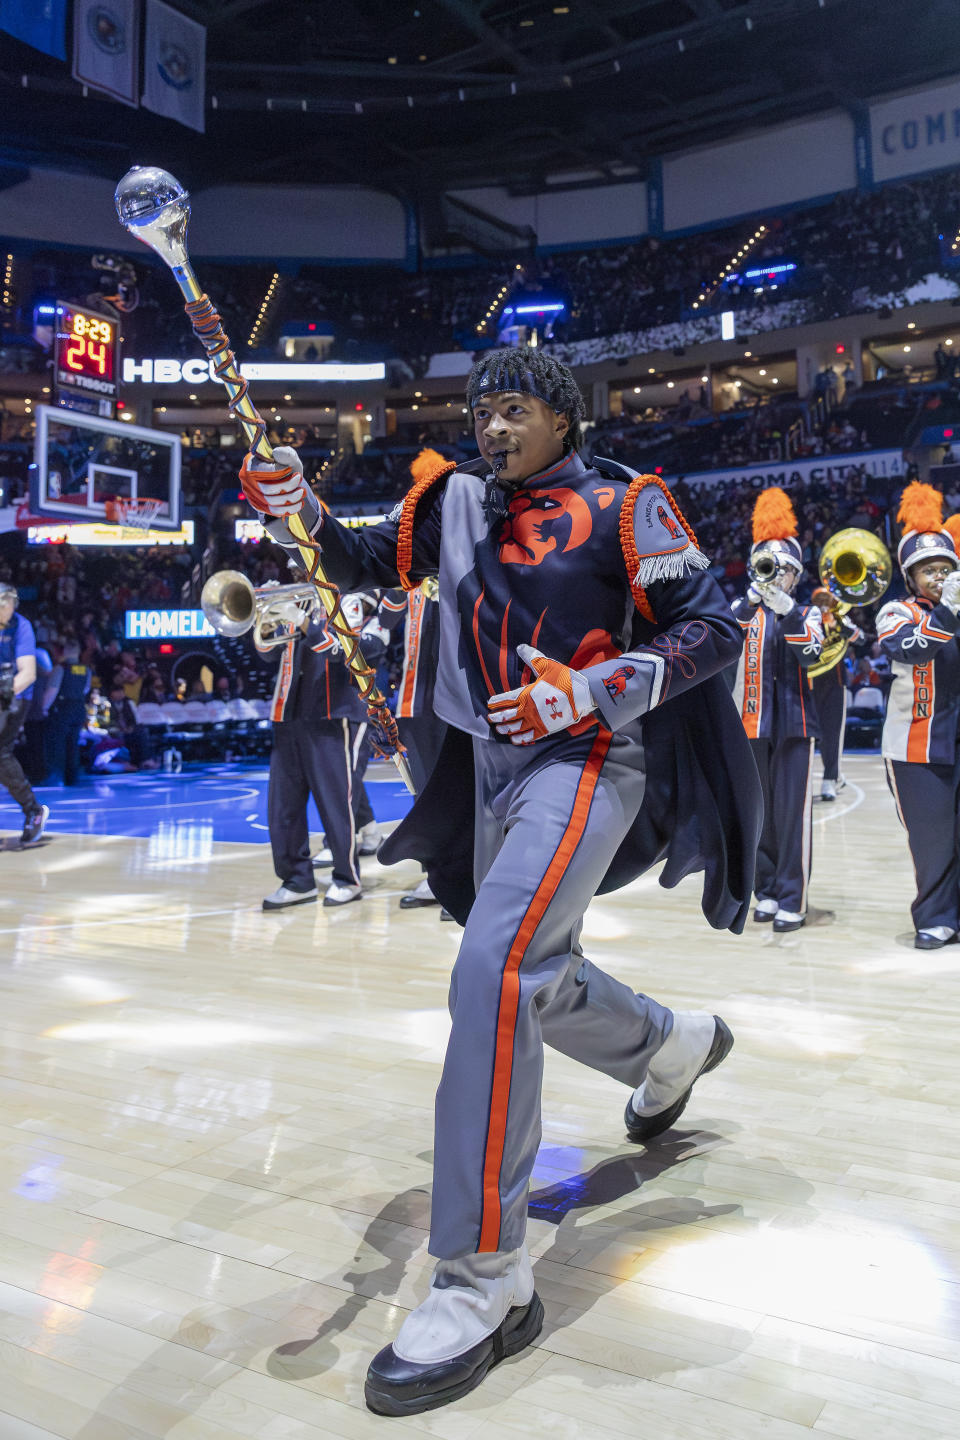 Feb 2, 2024; Oklahoma City, Oklahoma, USA; The Langston University Marching Pride Band performs during halftime of a game between the Charlotte Hornets and Oklahoma City Thunder as part of HBCU Night at Paycom Center. Mandatory Credit: Alonzo Adams-USA TODAY Sports